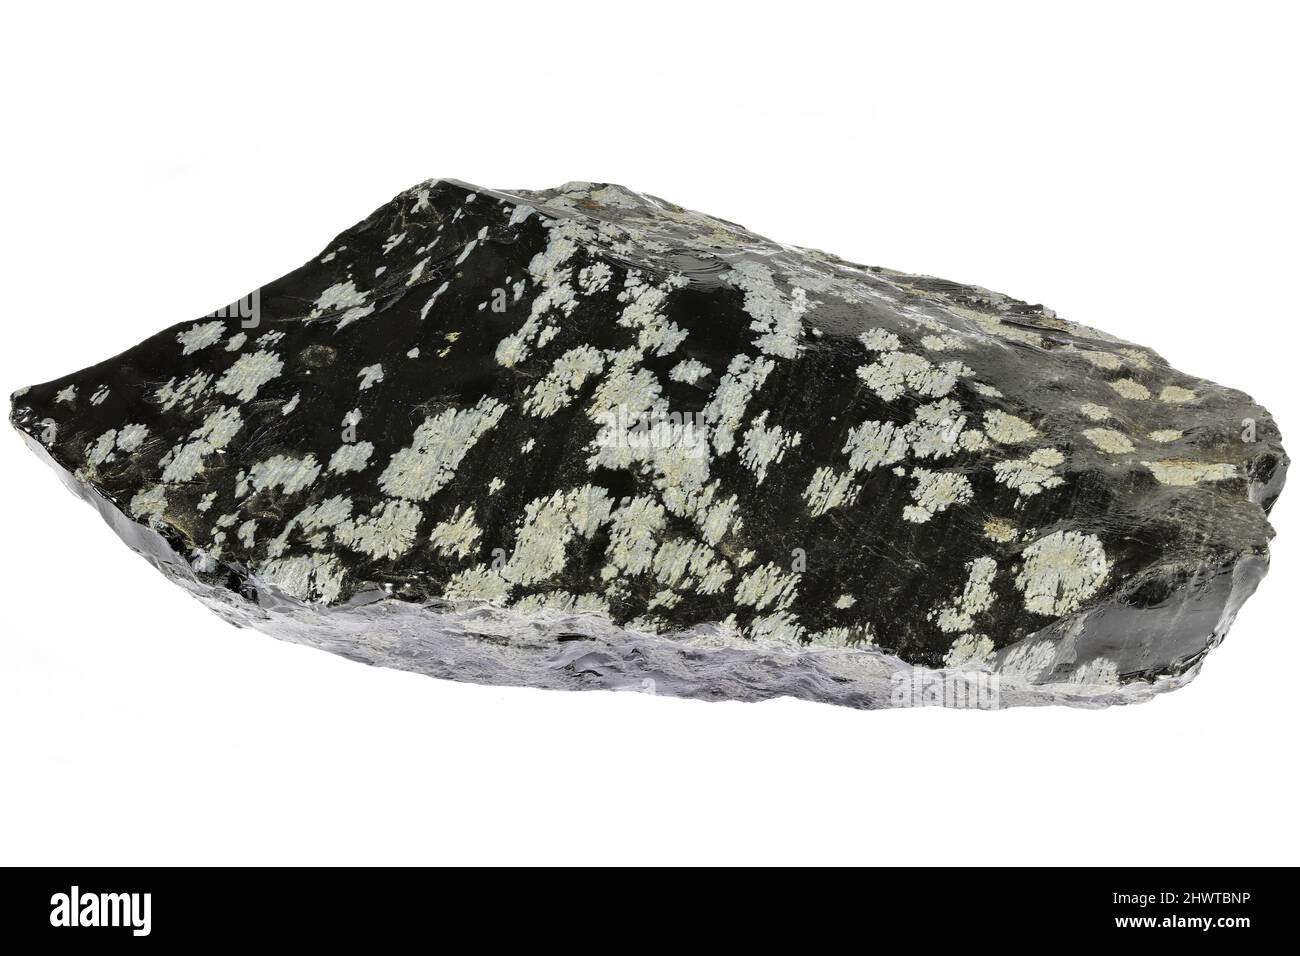 snowflake obsidian from Mexico isolated on white background Stock Photo